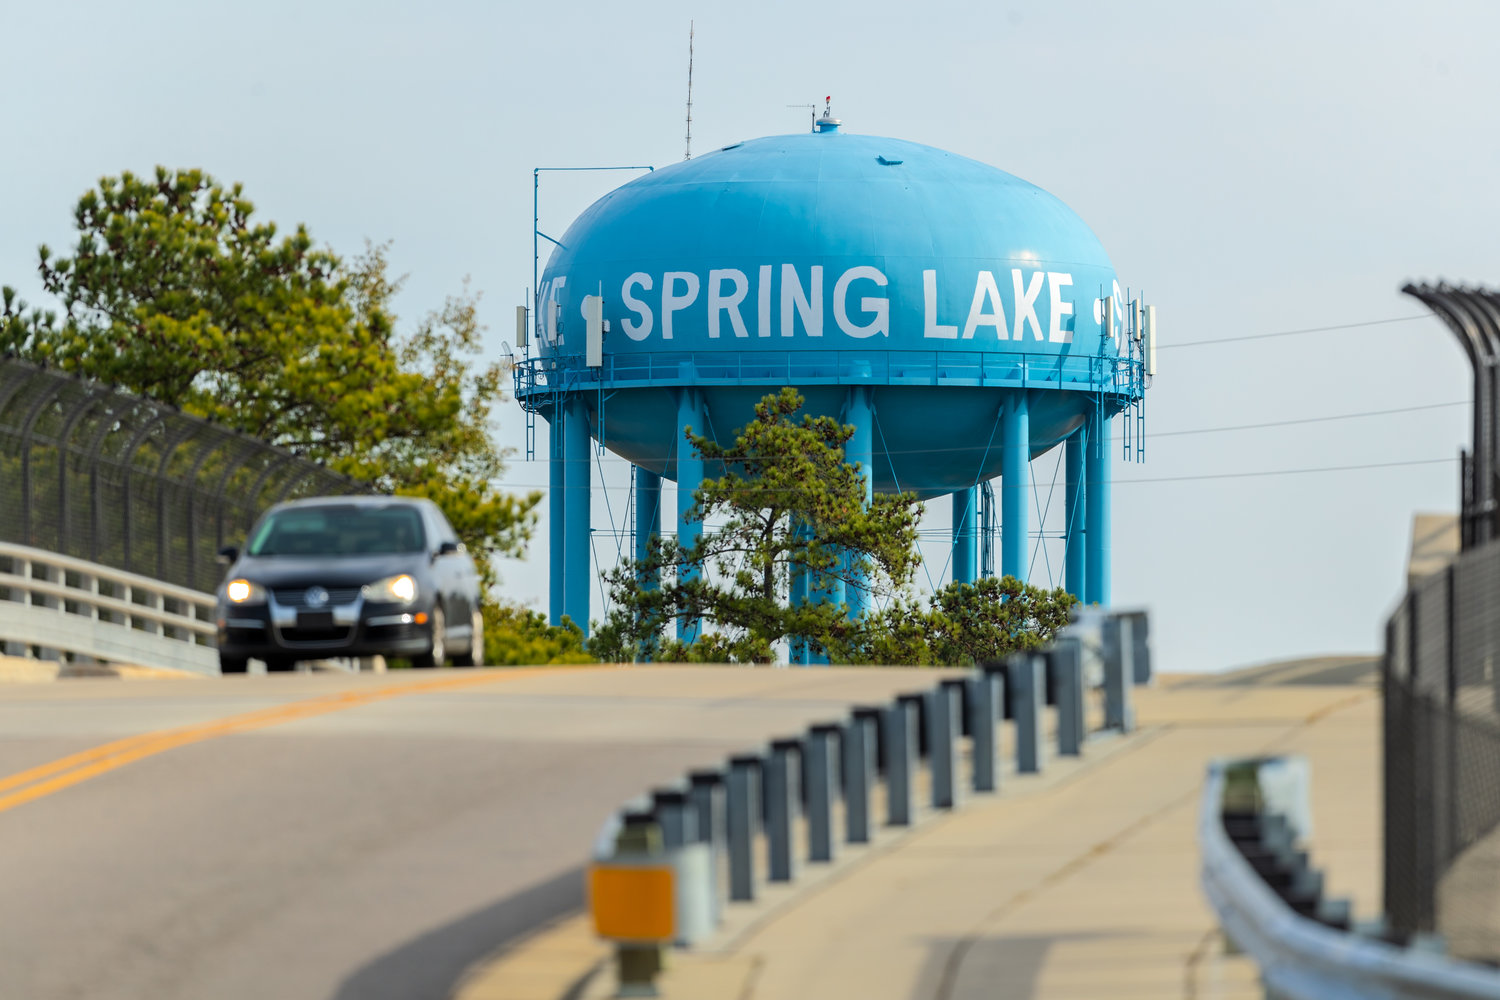 The Spring Lake Board of Aldermen met at 6 p.m. Monday at the Spring Lake Town Hall.